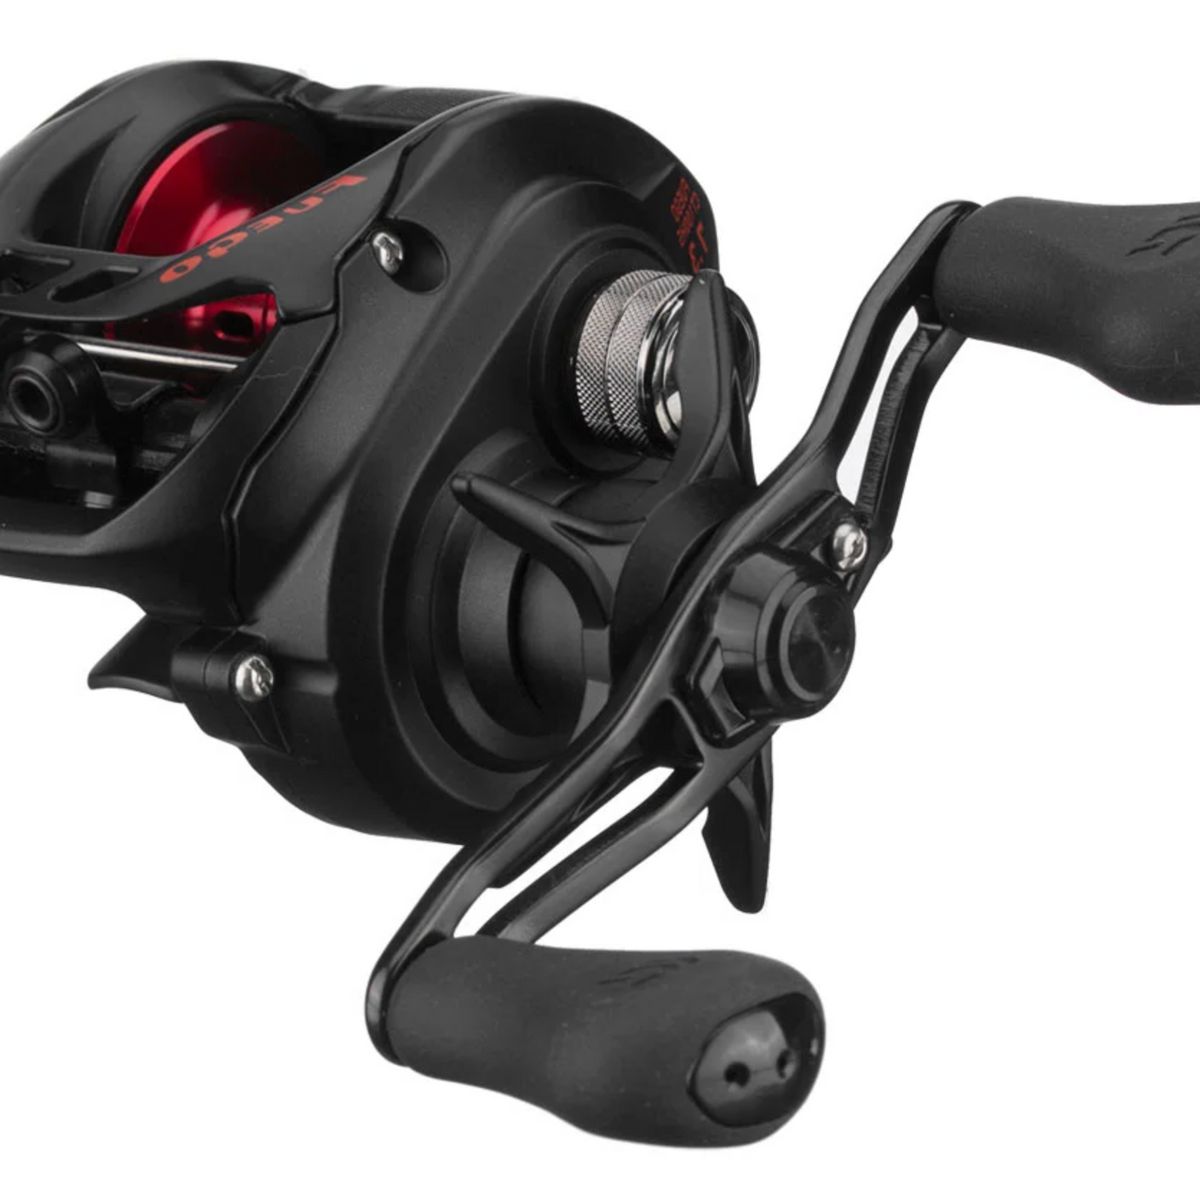 Alta Pesca Panama, Daiwa Fuego Baitcasting Fishing Reel Daiwa's first  spinning reel rolled off the assembly line in 1955. Since then, the company  has gro